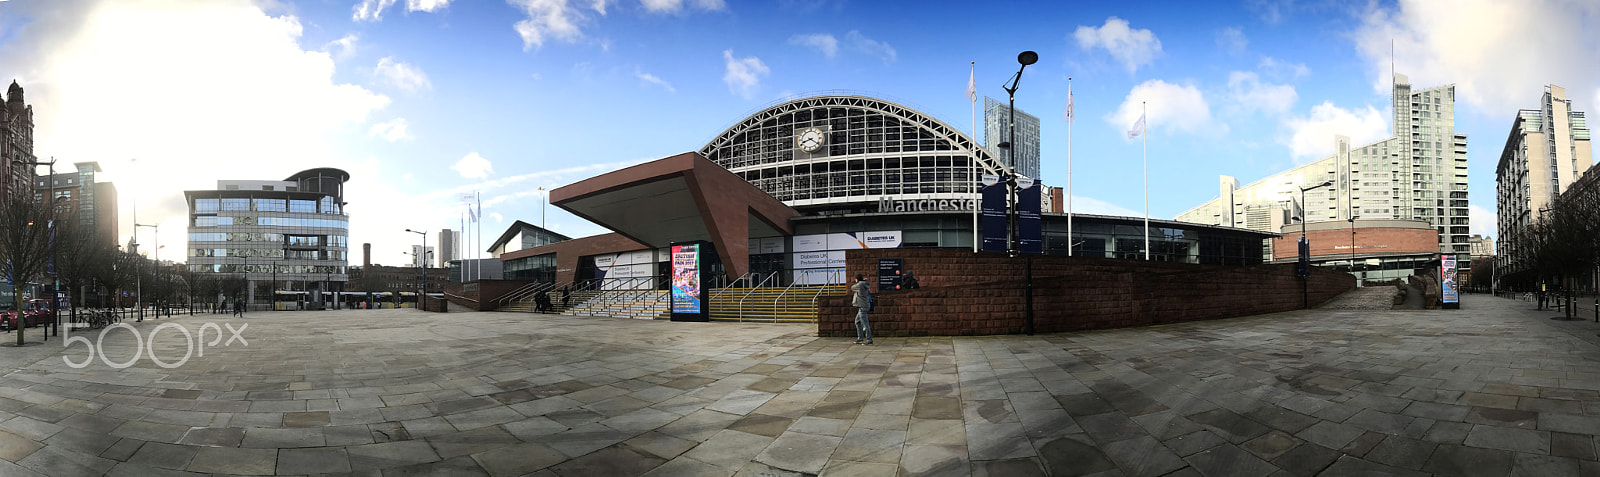 Apple iPhone 7 Plus + iPhone 7 Plus back camera 3.99mm f/1.8 sample photo. Manchester central convention centre photography